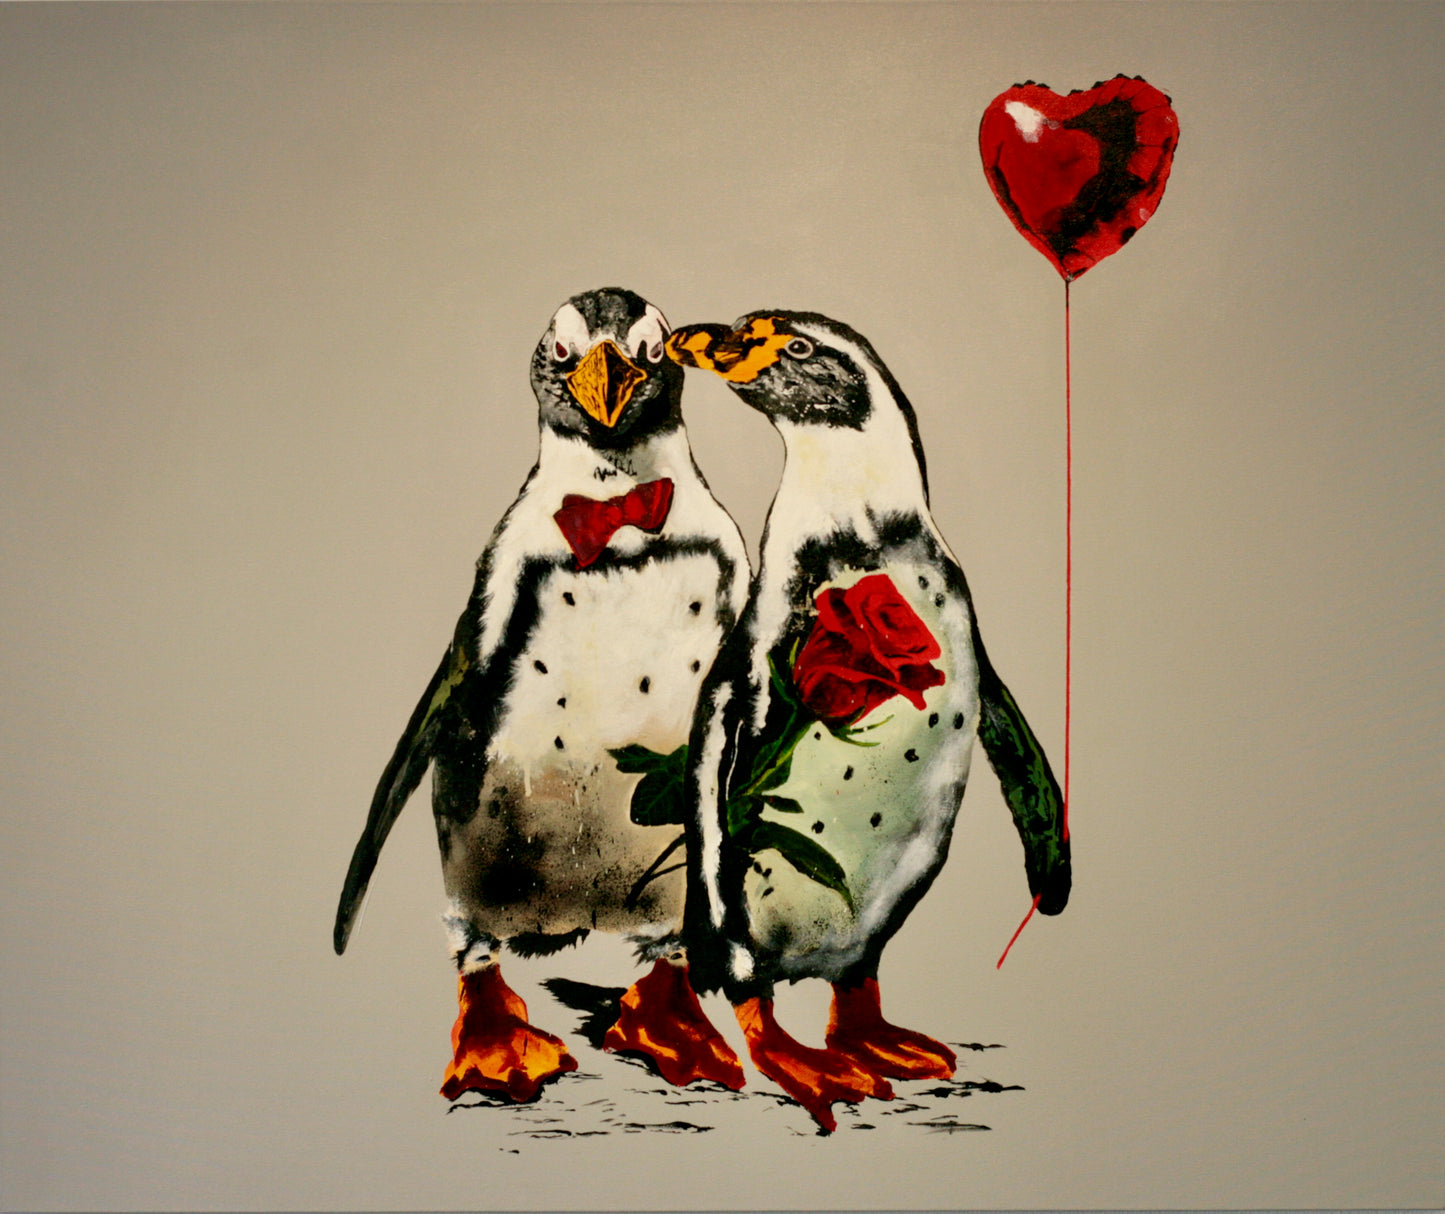 Robert Hilmersson - All you need is Love, acrylic on canvas